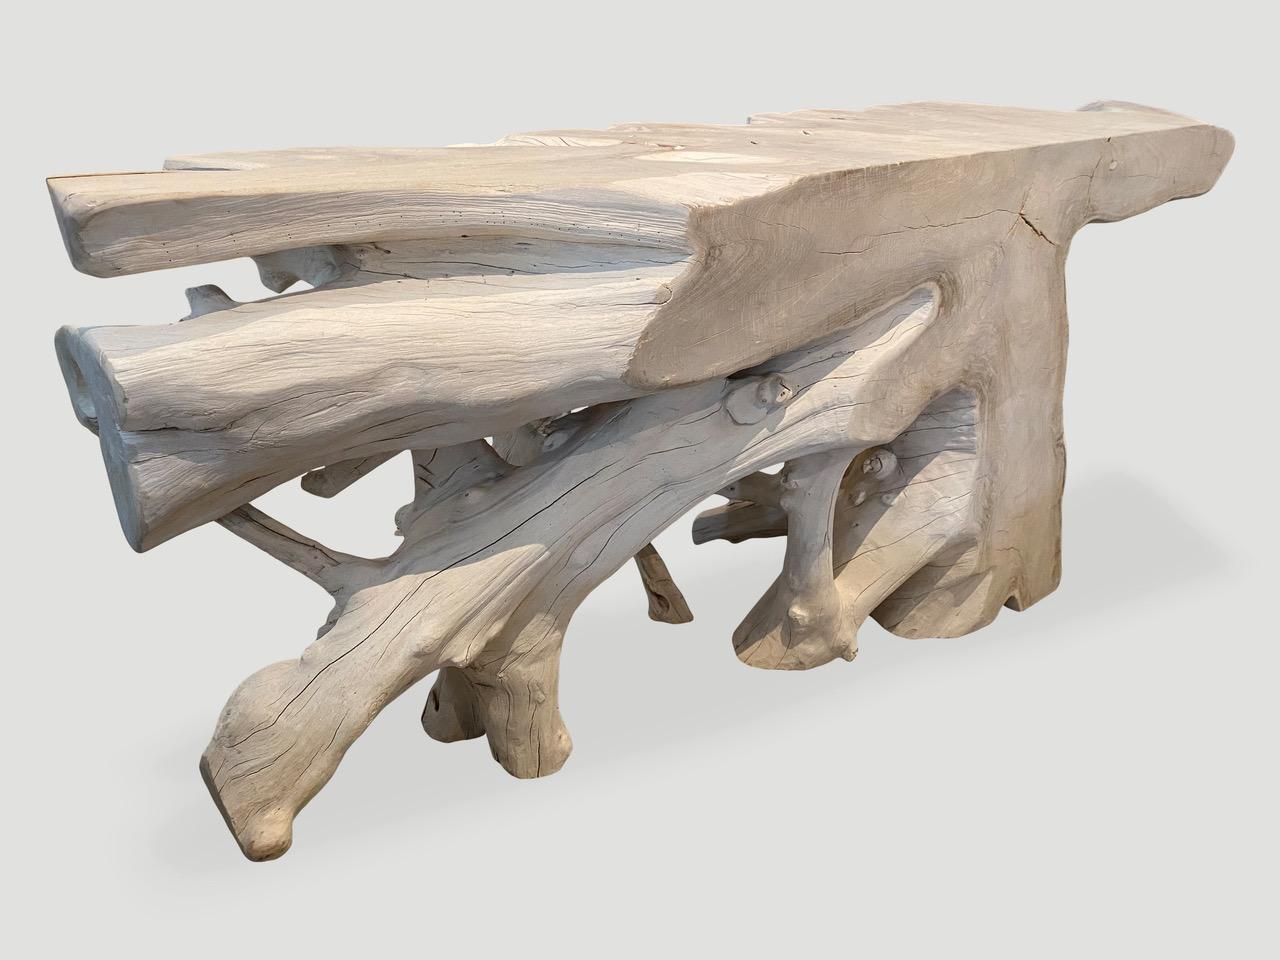 Natural organic formed console made from a hundred year old reclaimed teak root. Fabulous on both sides. Glass or lucite can be added, if preferred on the top section. Organic is the new modern.

The St. Barts Collection features an exciting new